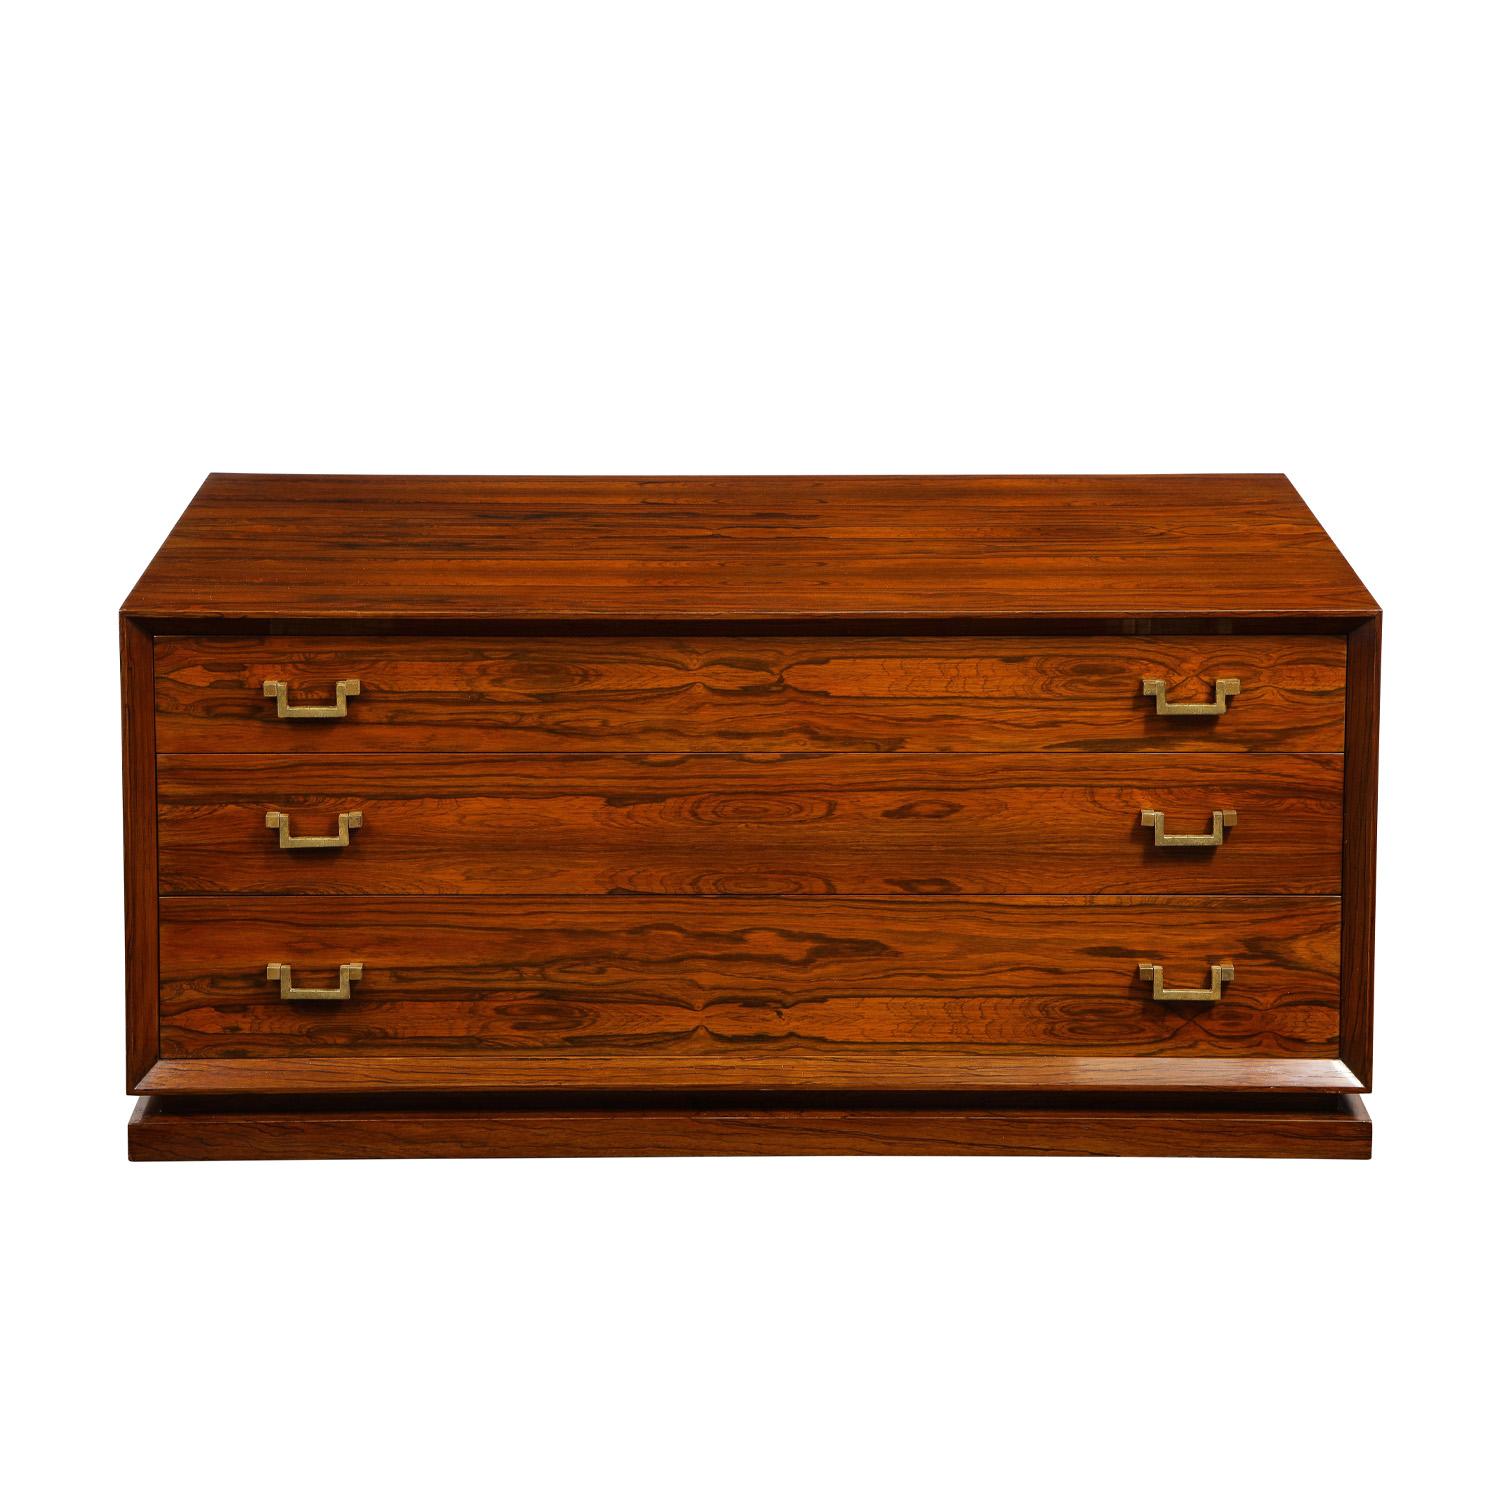 Low chest of drawers in beautifully figured Brazilian rosewood with stylized brass pulls and handles on sides, custom design, American c.1960. This piece is beautifully made.